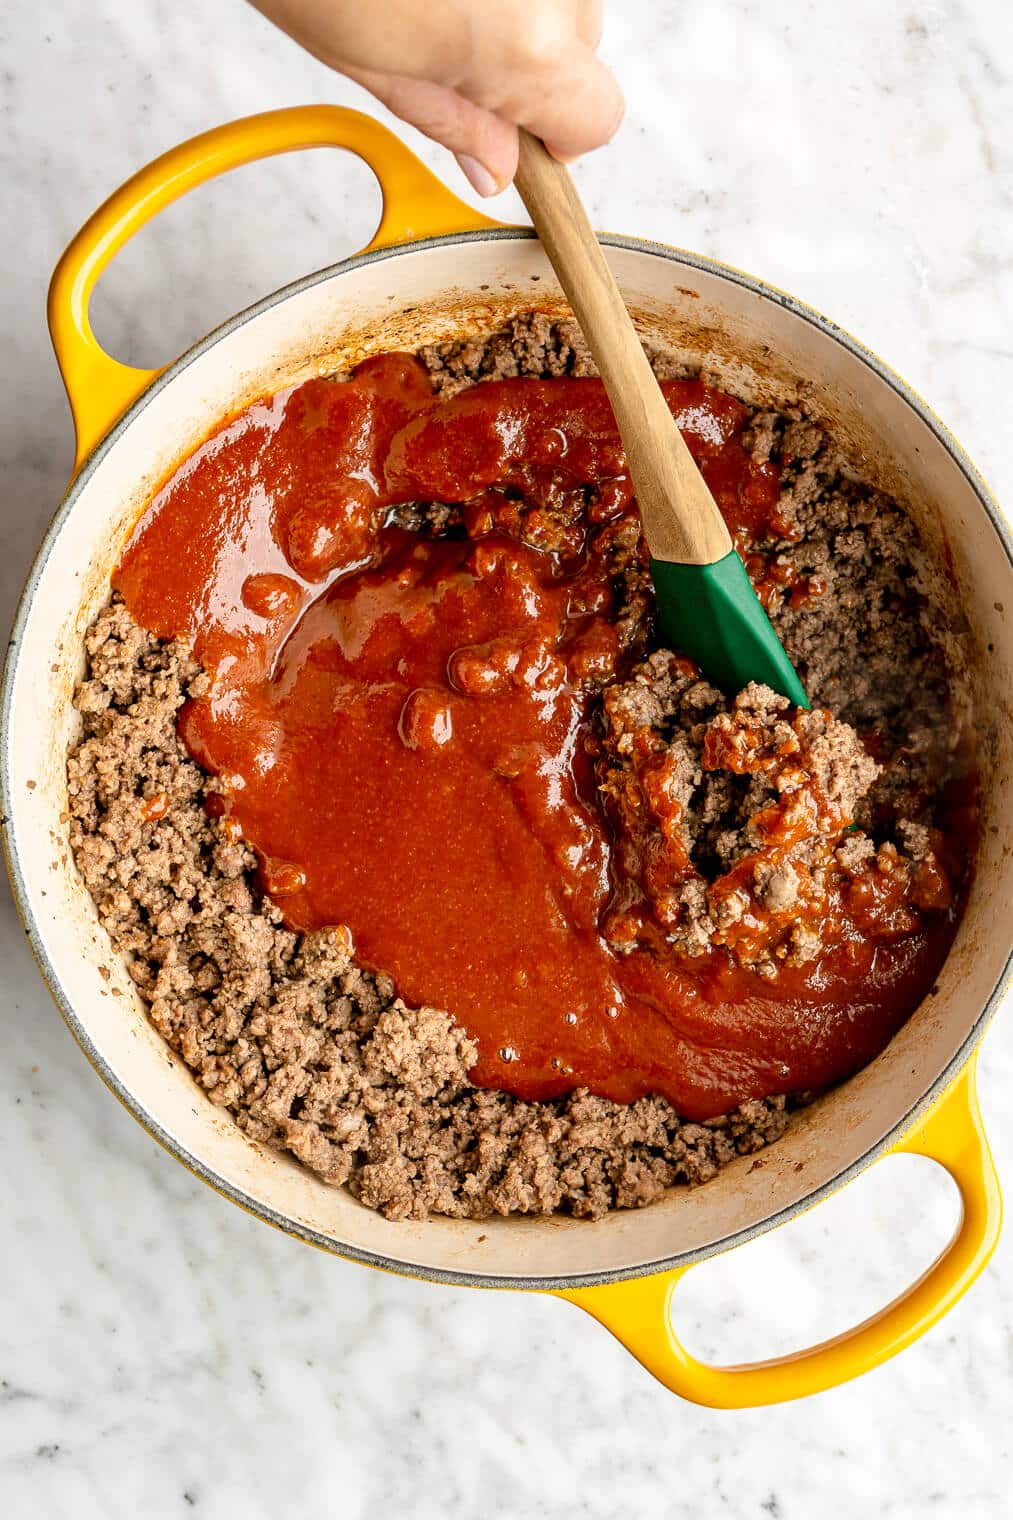 Sloppy joe sauce being mixed into cooked ground beef in a yellow enameled cast iron pot.